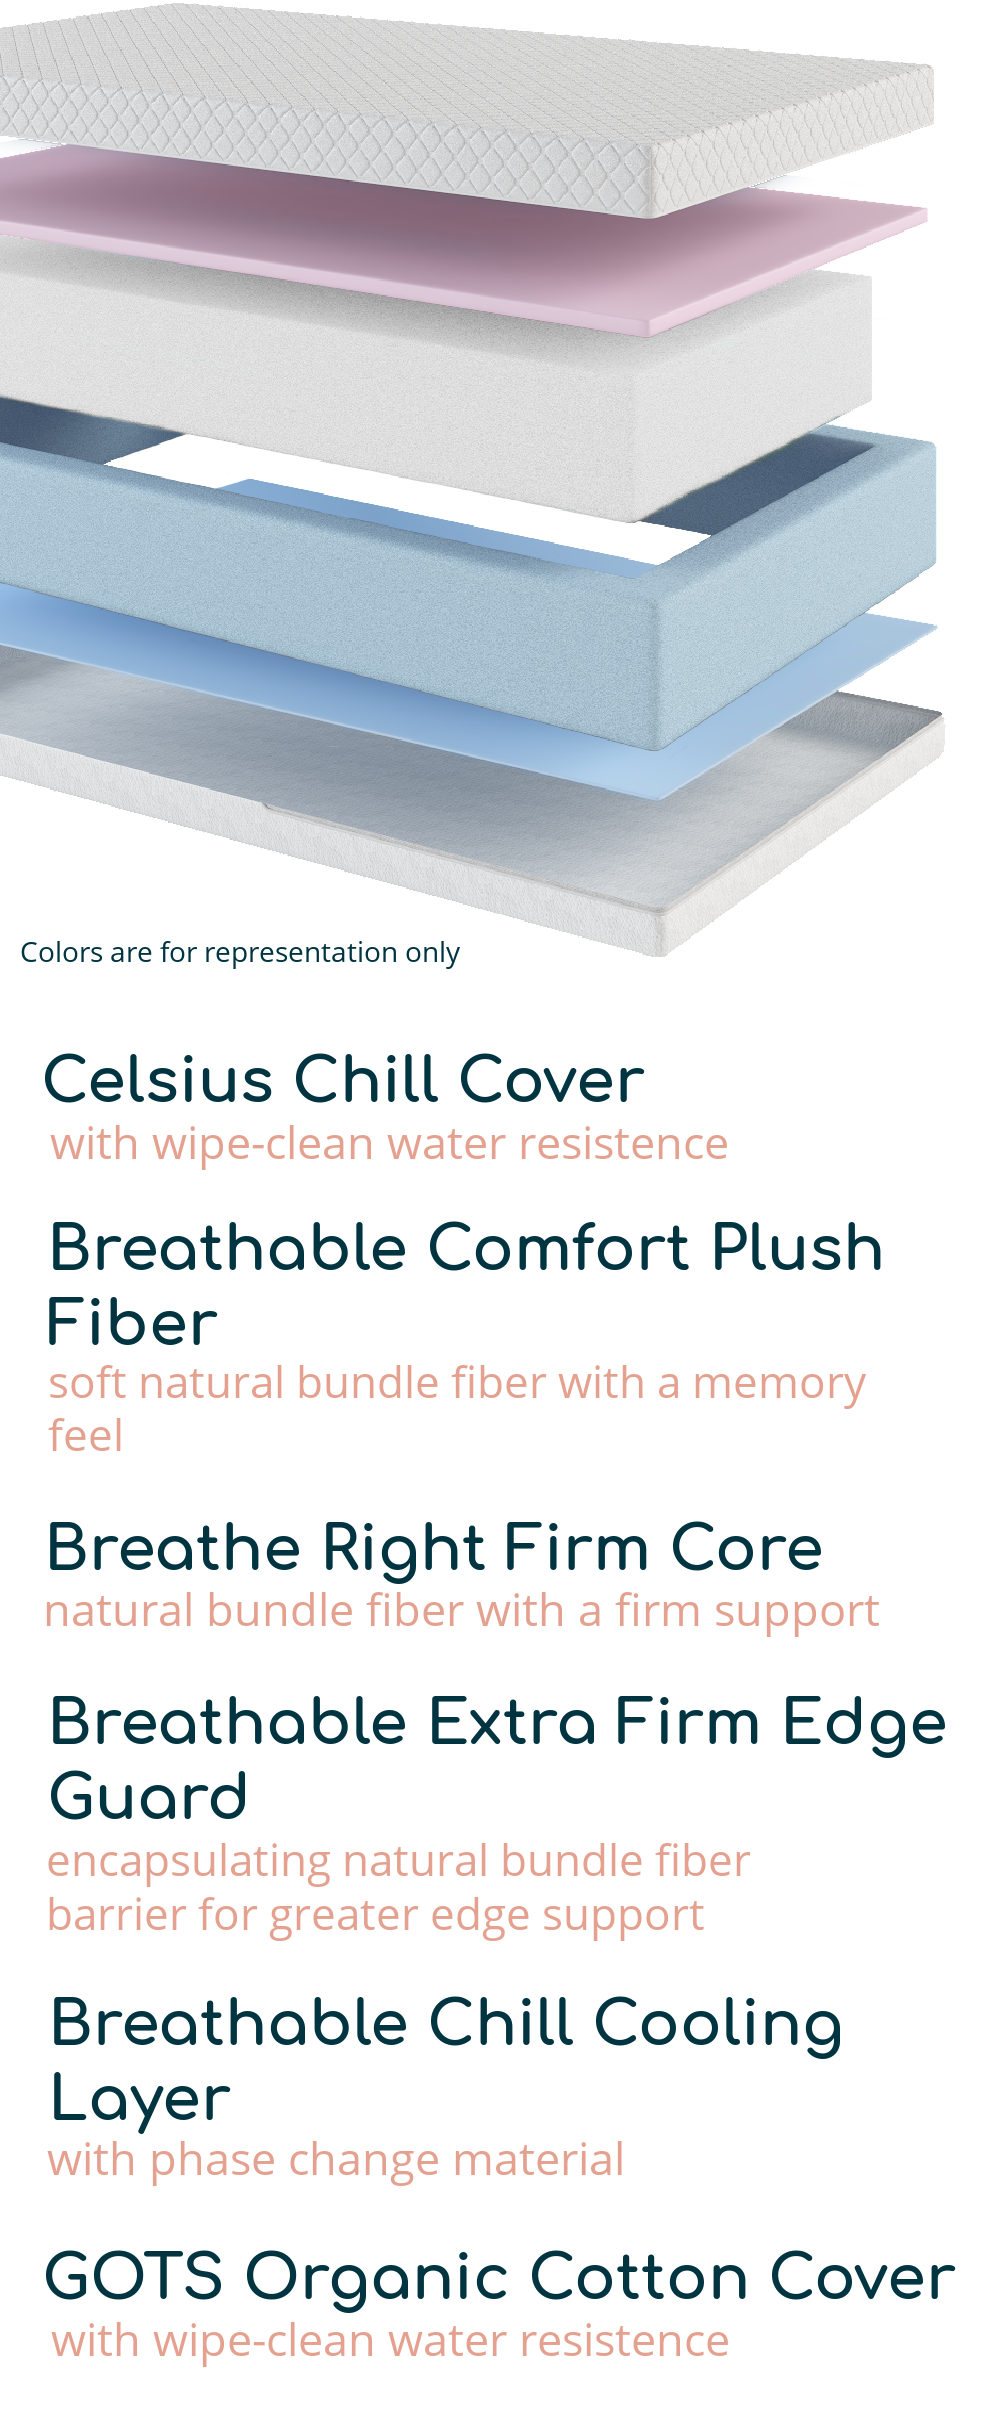 Celsius Chill Cover-with wipe clean resistance, Breathable Comfort Plush Fiber-soft natural bundle fiber with a memory feel, Breathe Right Firm Core-natural bundle fiber with a firm support, Breathable Extra Firm Edge Guard, Breathable Chill Cooling Layer, and GOTS Organic Cotton Cover.